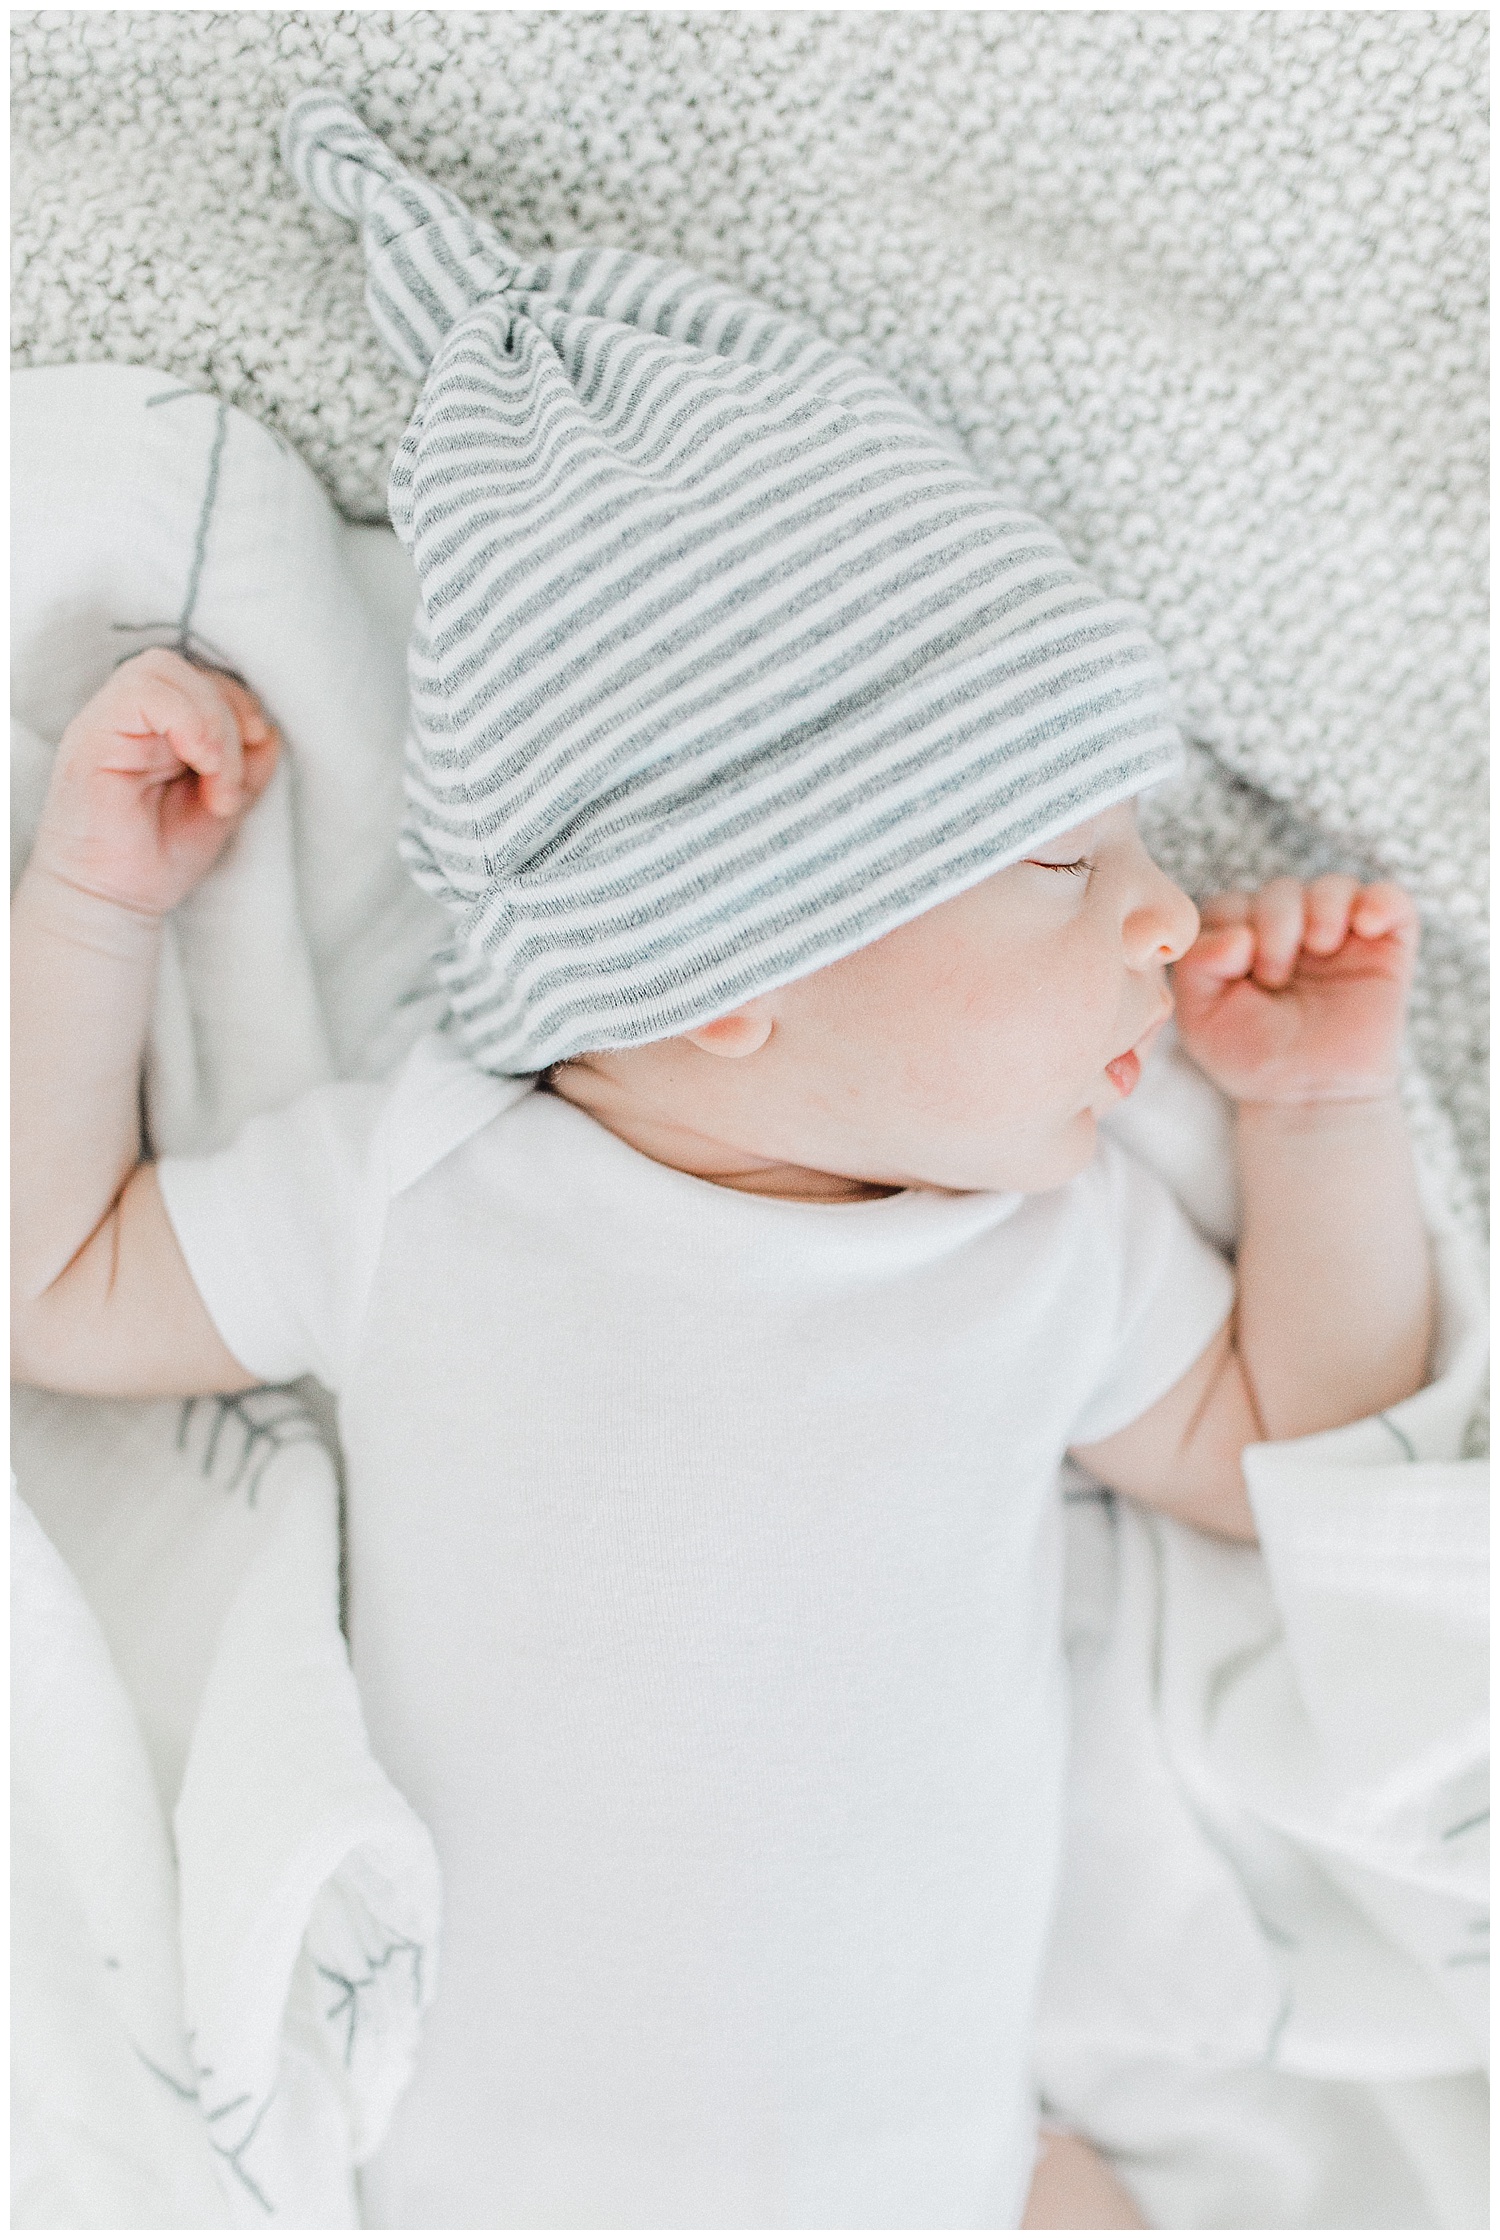 Newborn Lifestyle In-Studio Photo Session Light and Airy Kindred Presets Emma Rose Company Seattle Portland Wedding and Portrait Photographer18.jpg